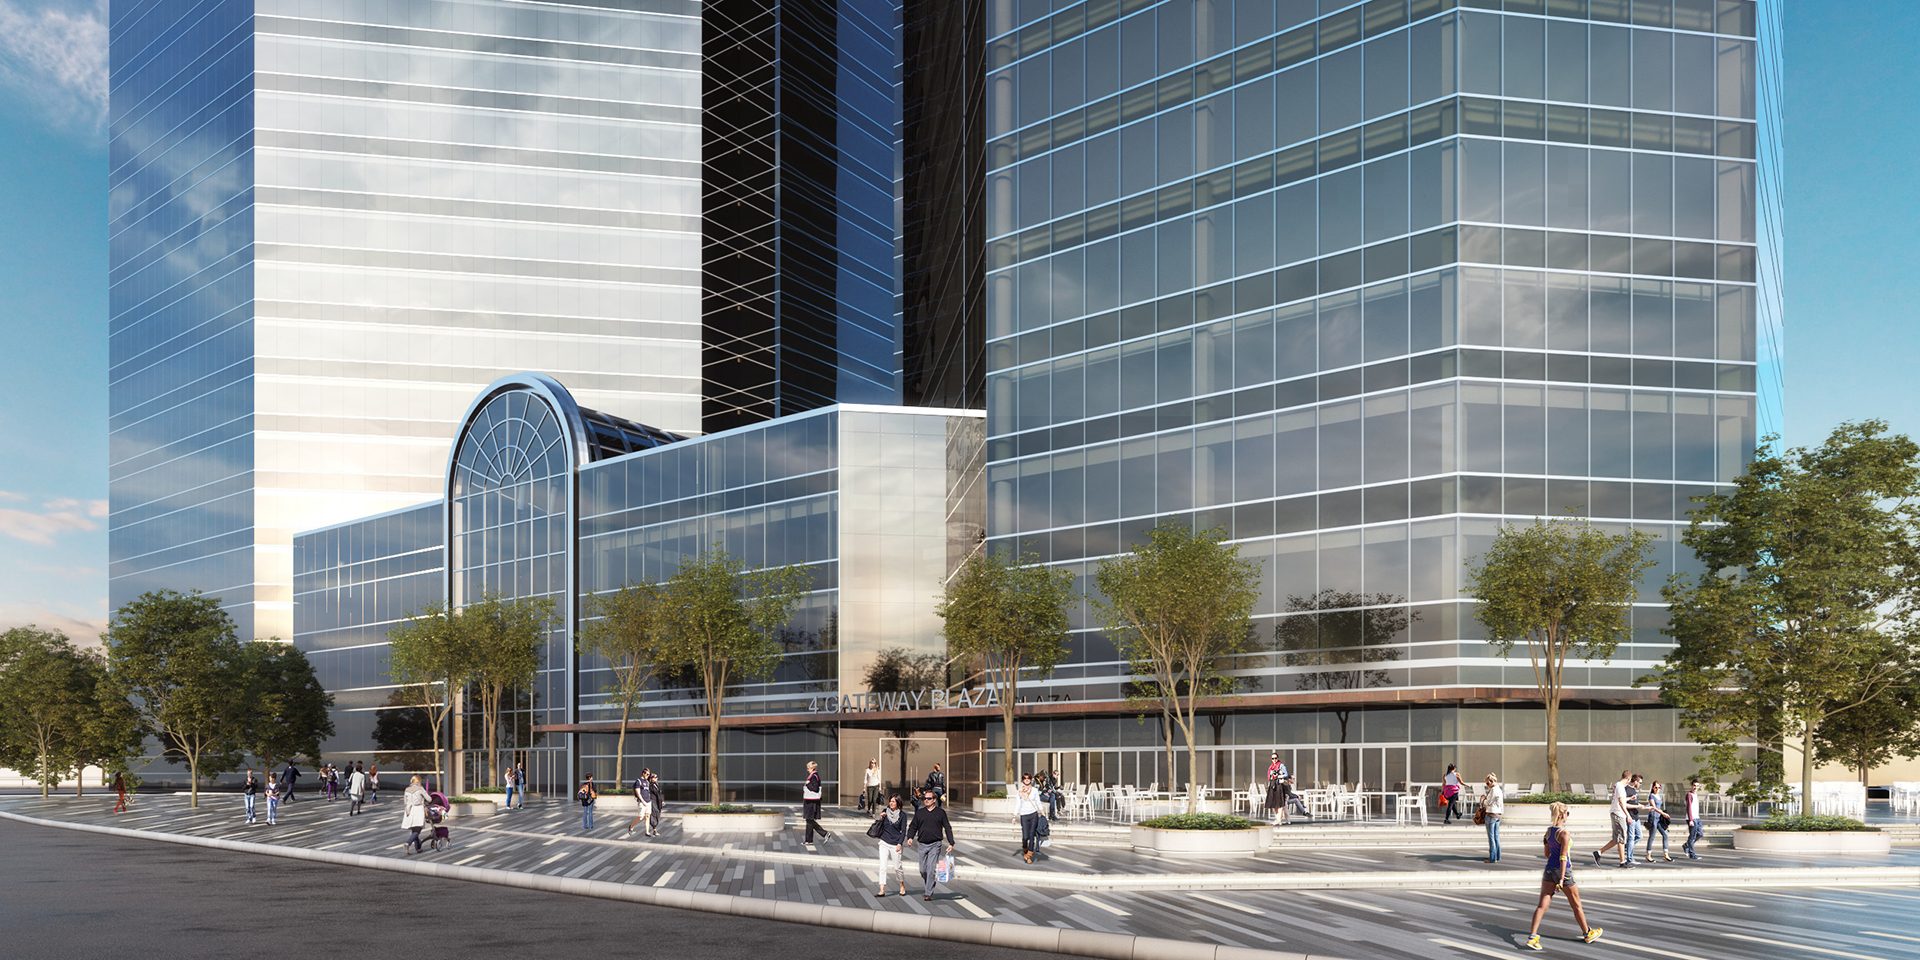 Rendering of the proposed exterior of 4 Gateway Center as part of the building renovation study